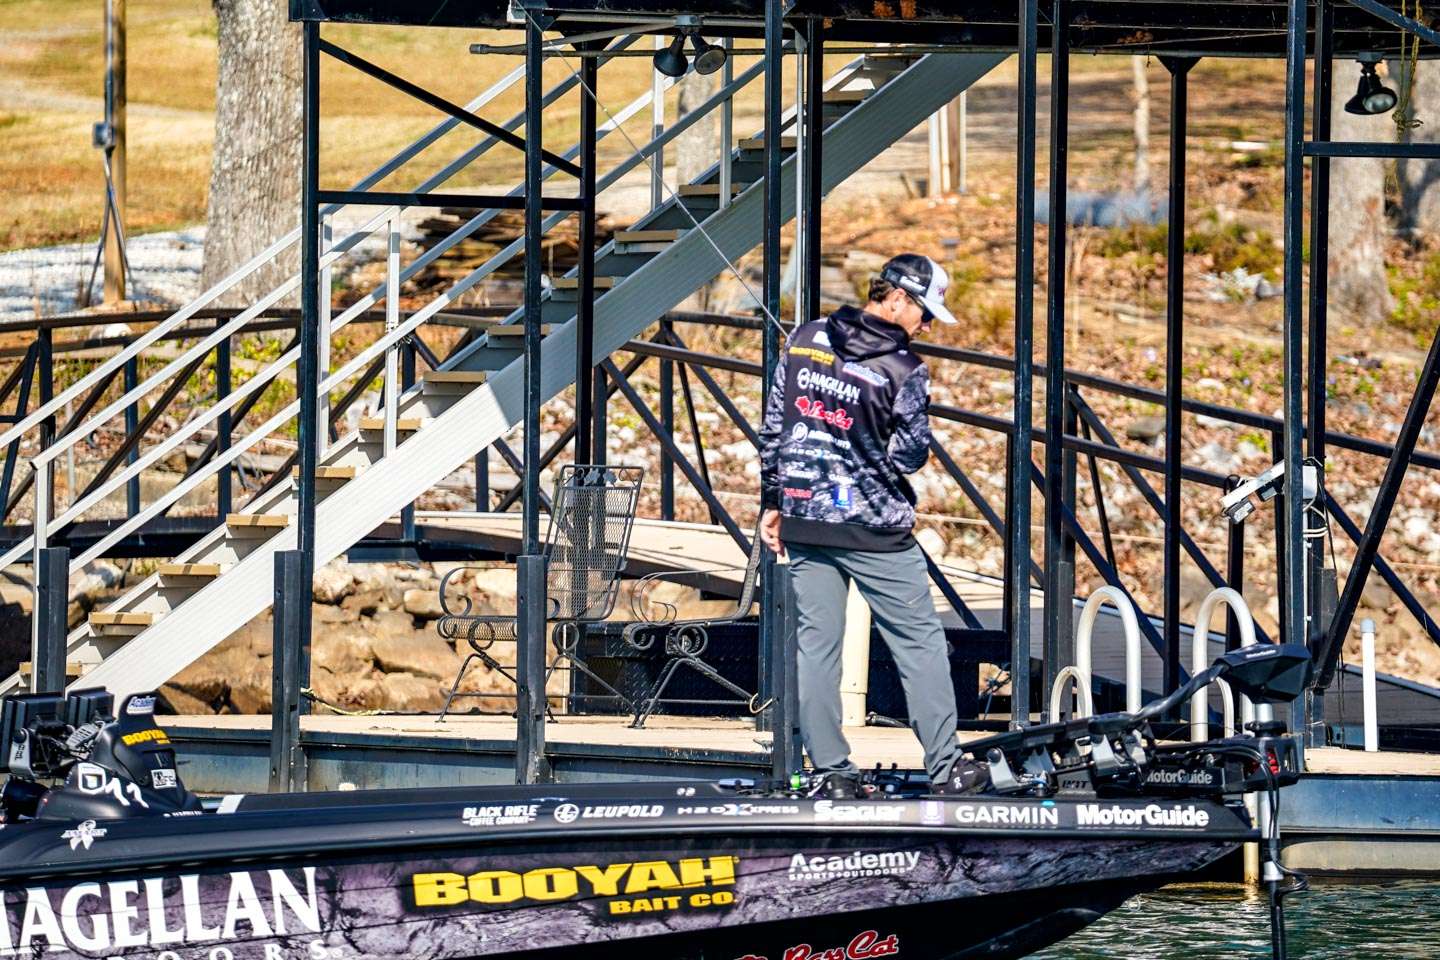 The next move Blaylock made was to a nearby pocket where he began skipping a wacky rig around floating docks. 